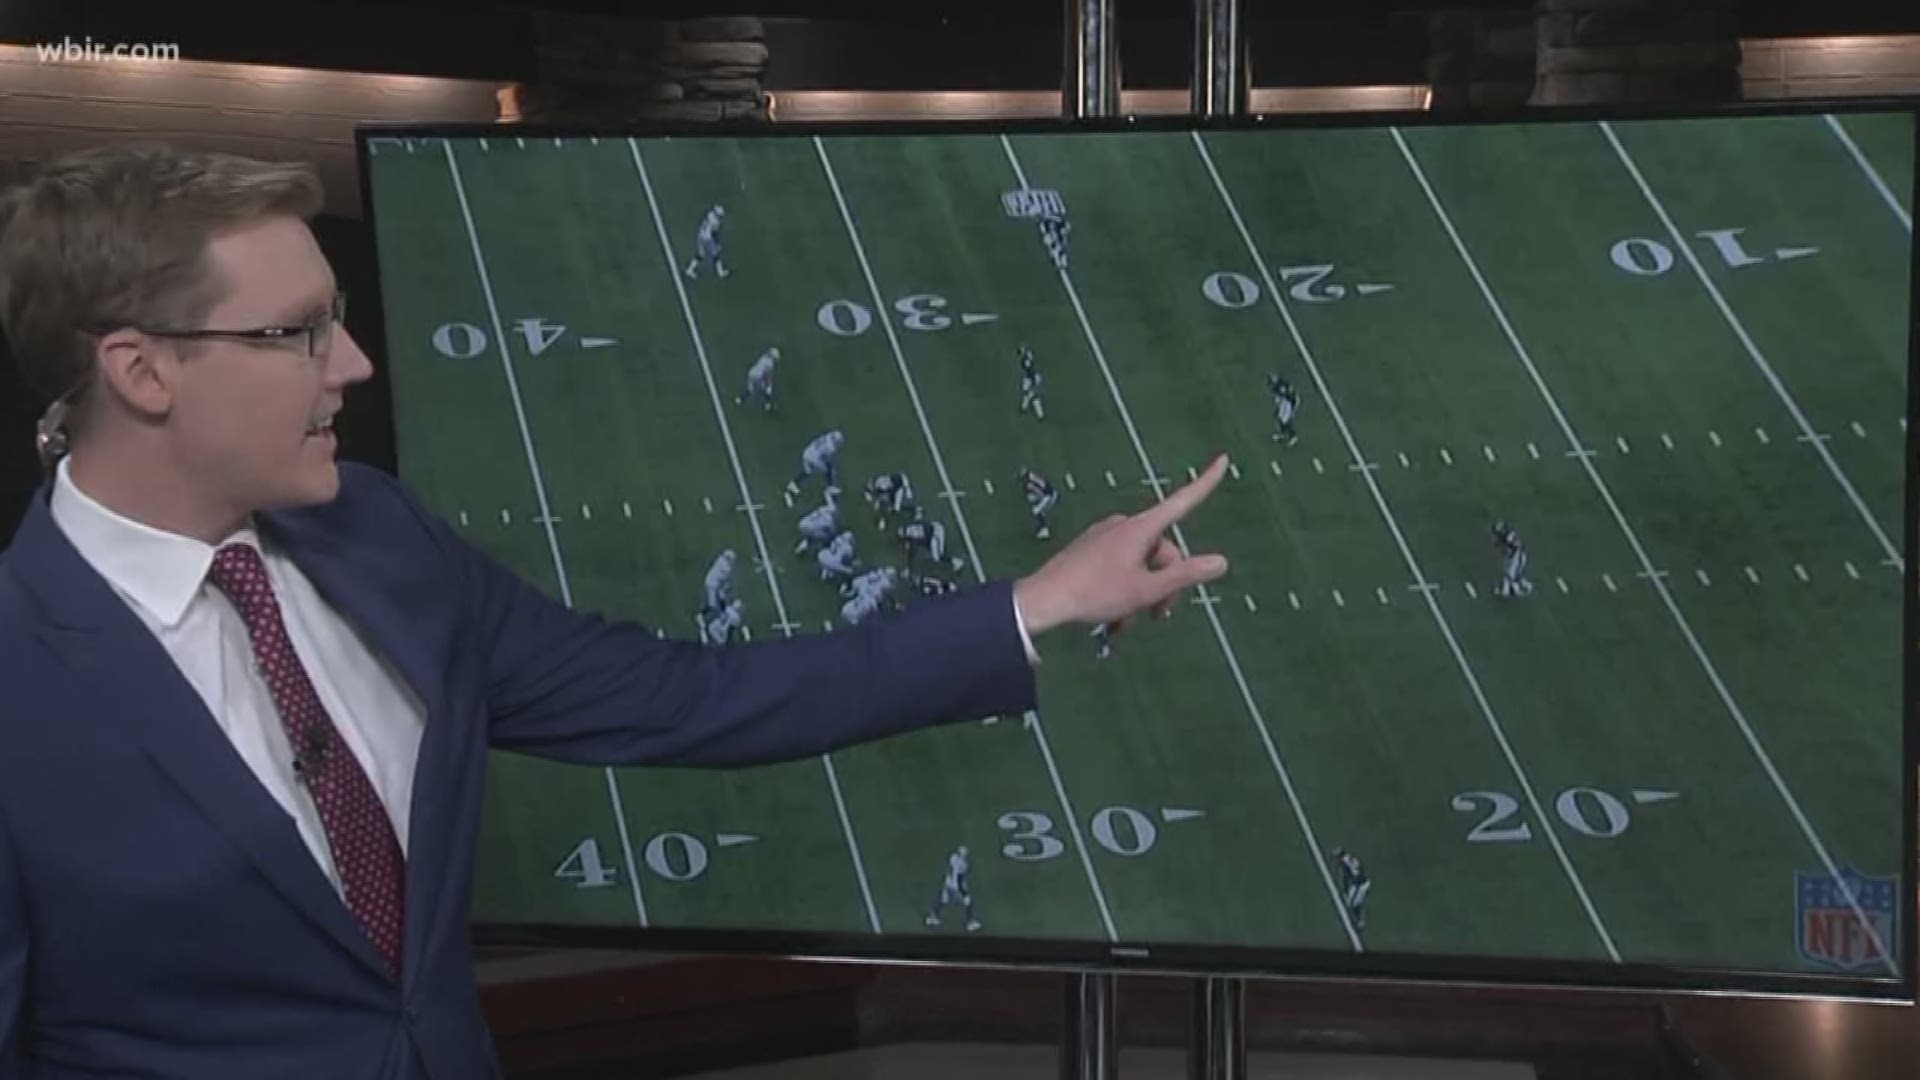 Former Vol Jason Witten retired on Thursday after 15 seasons with the Dallas Cowboys. WBIR 10Sports Anchor Patrick Murray breaks down his signature play, Y-option.